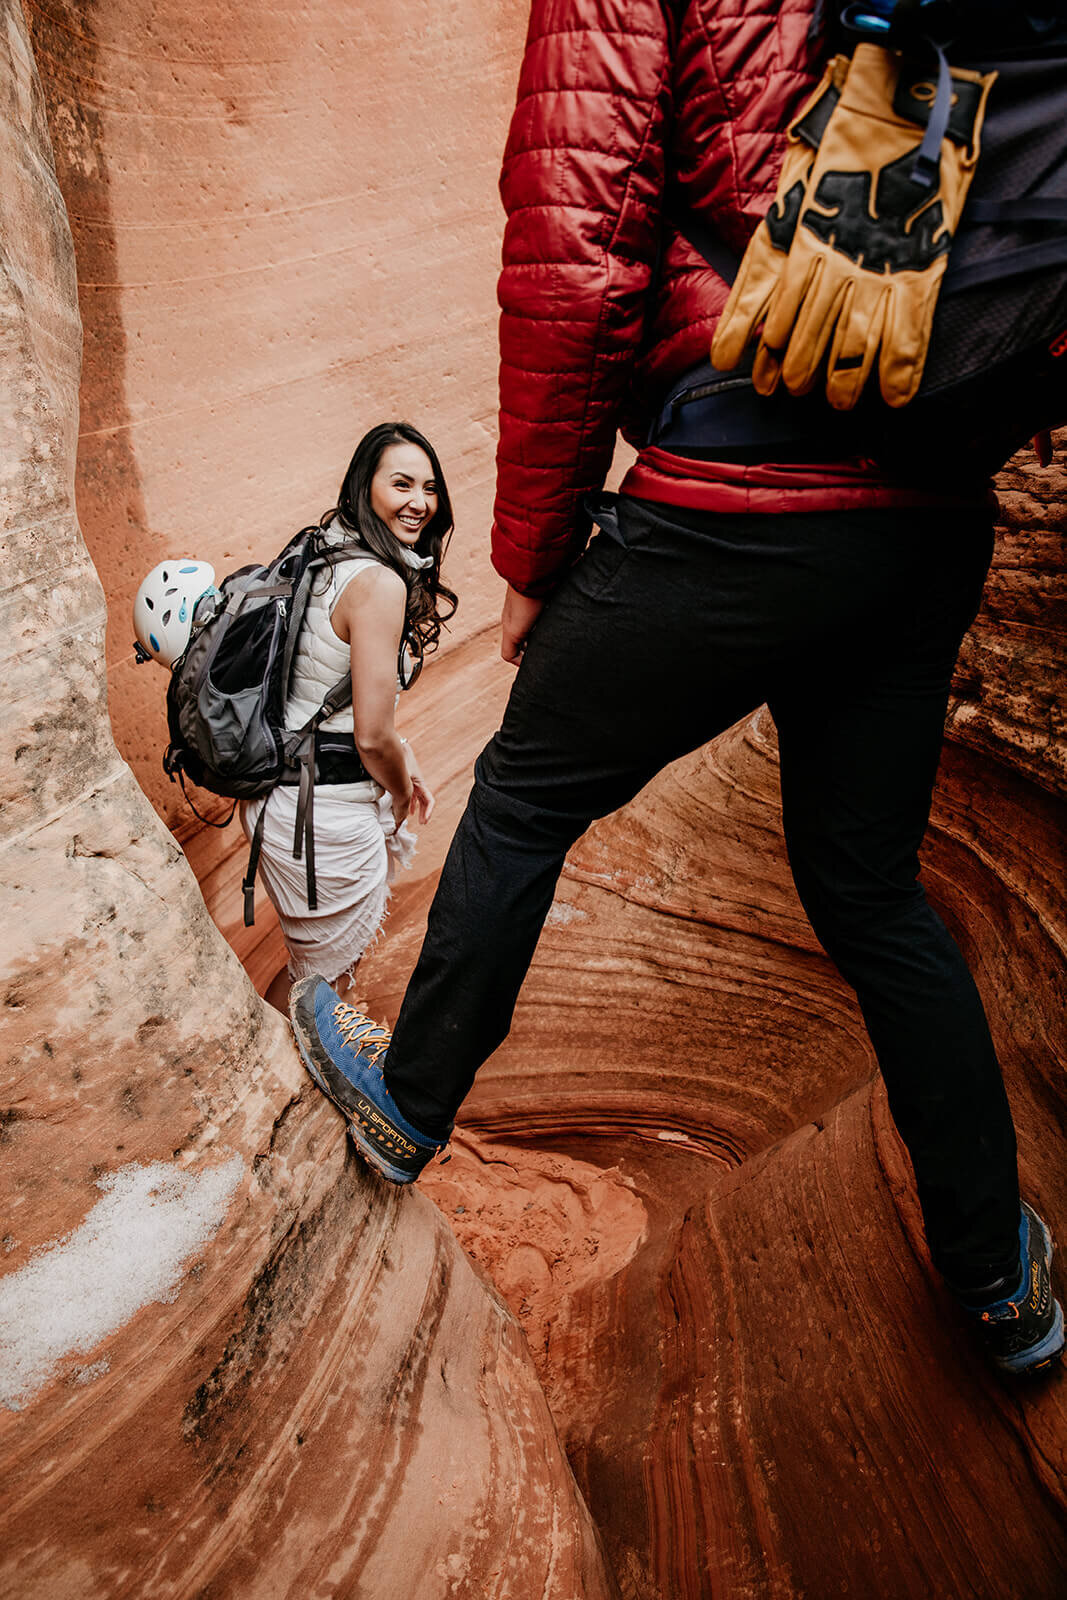  Eloping couple explore canyon outside of Zion National Park. Zion National Park elopement photographer 